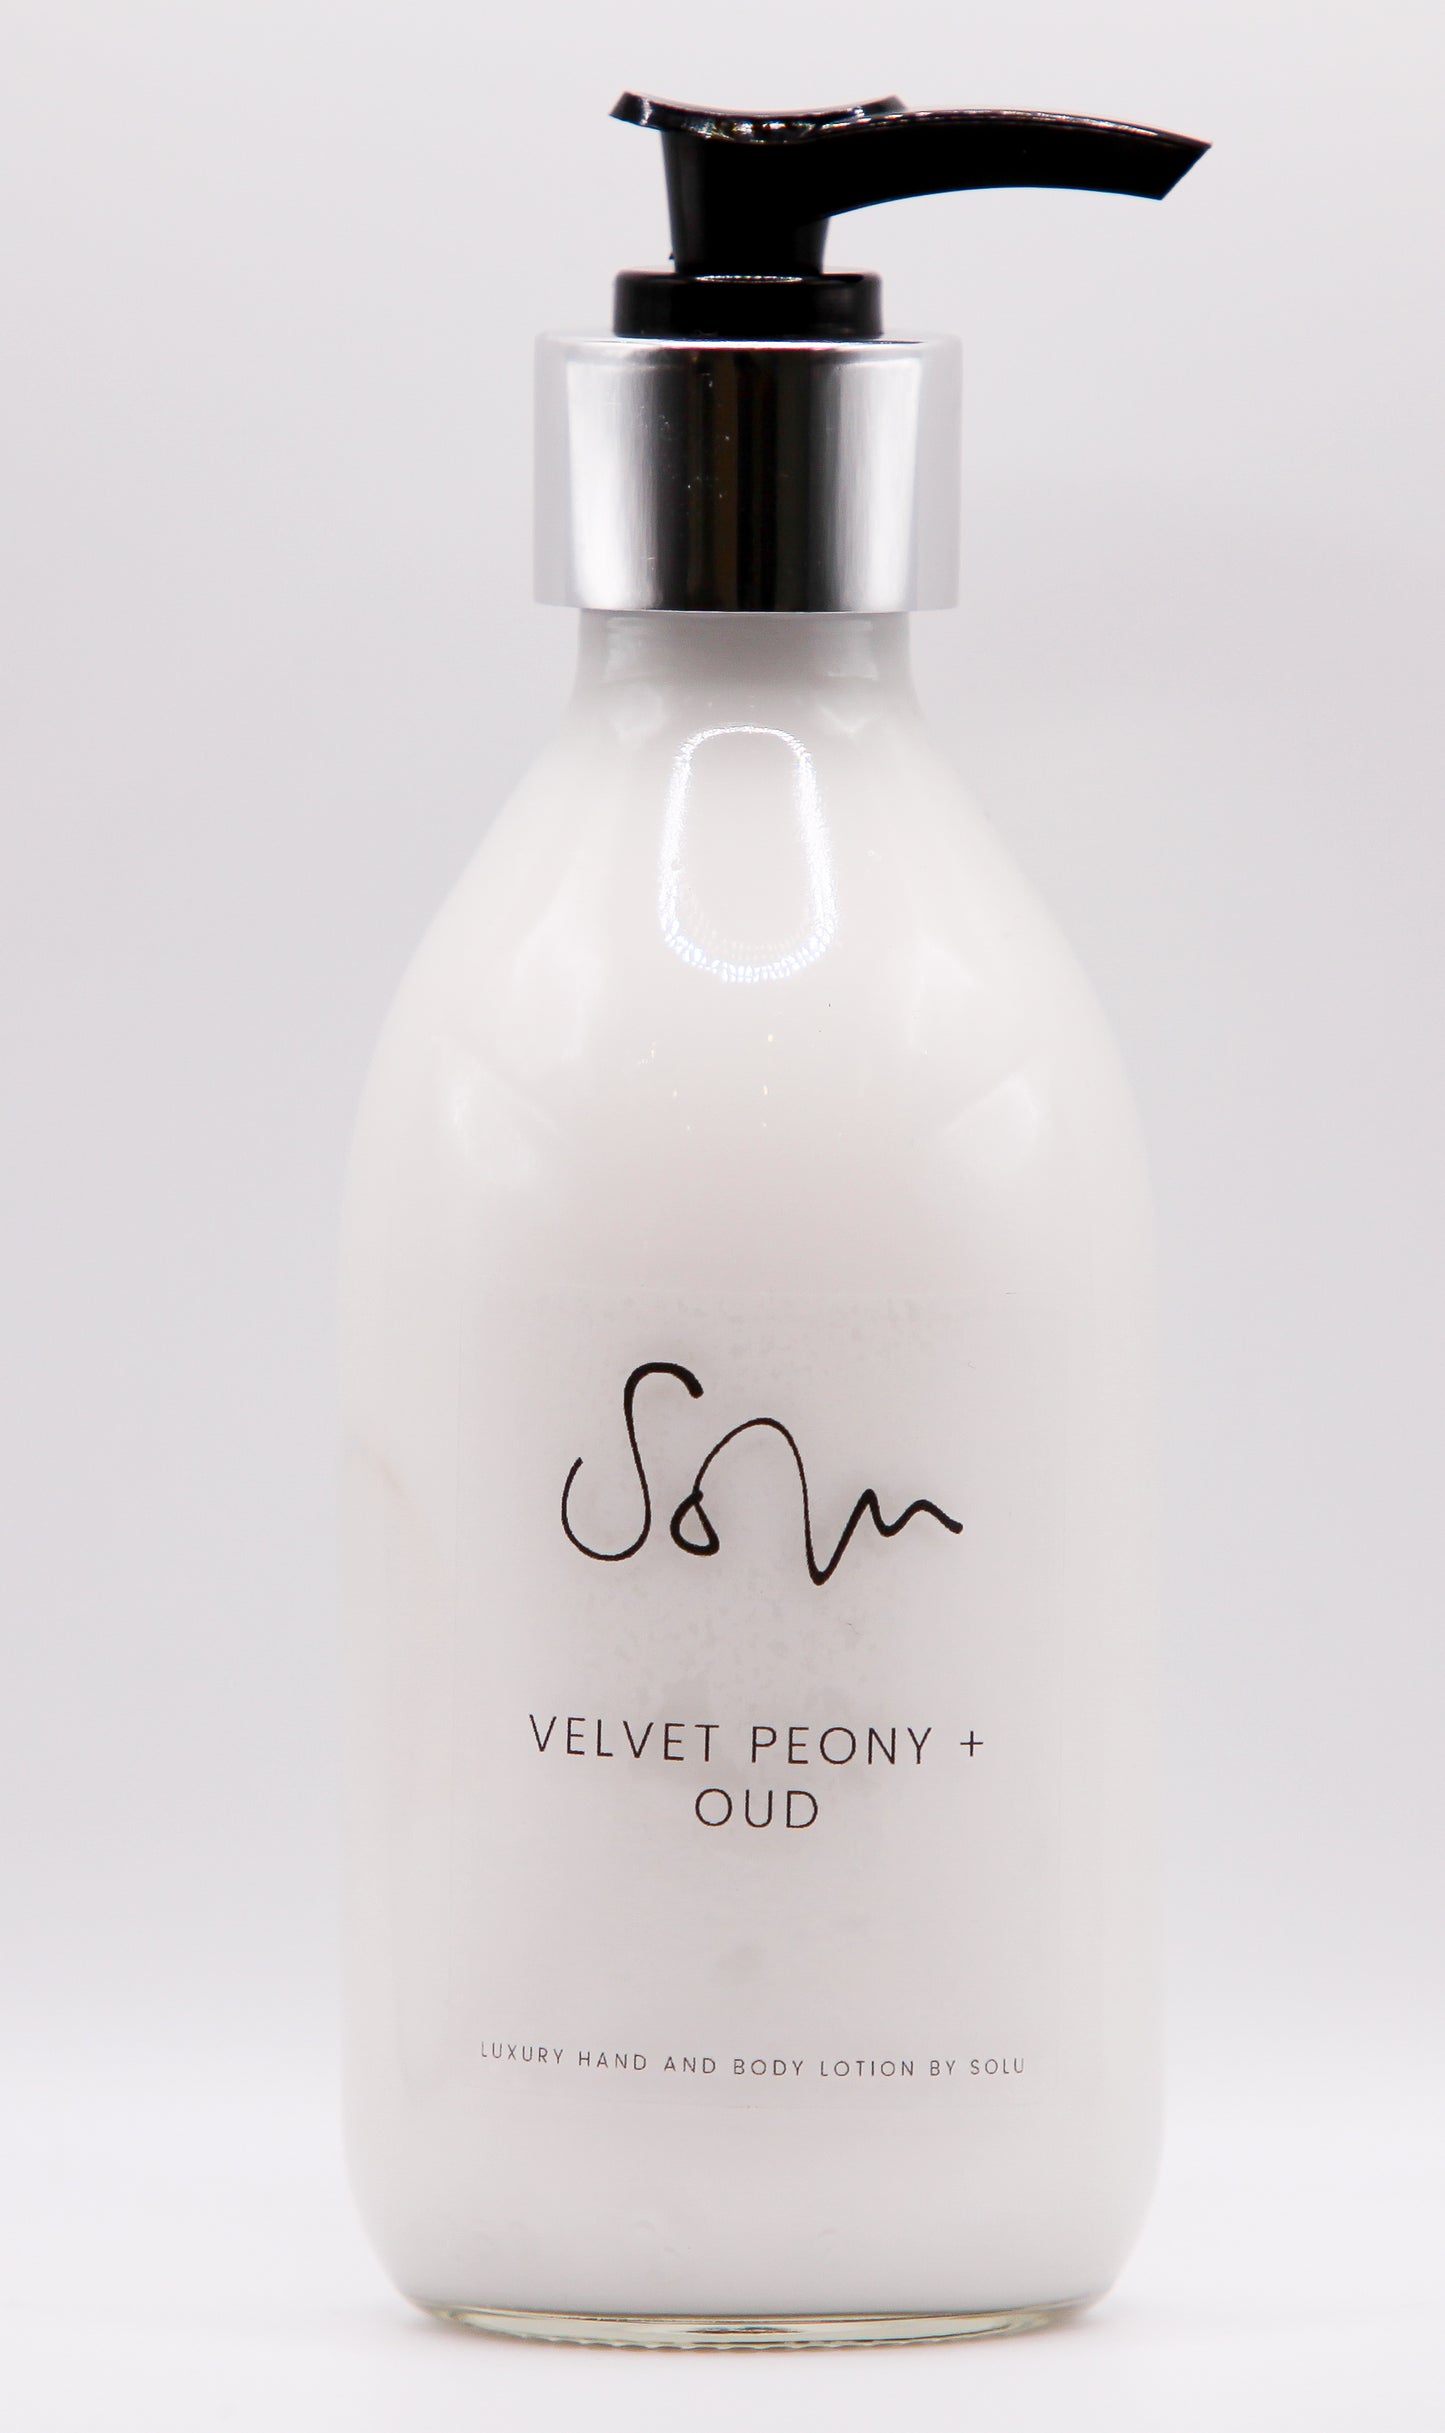 Velvet Peony & Oud Luxury Hand and Body Lotion - Solu Candles